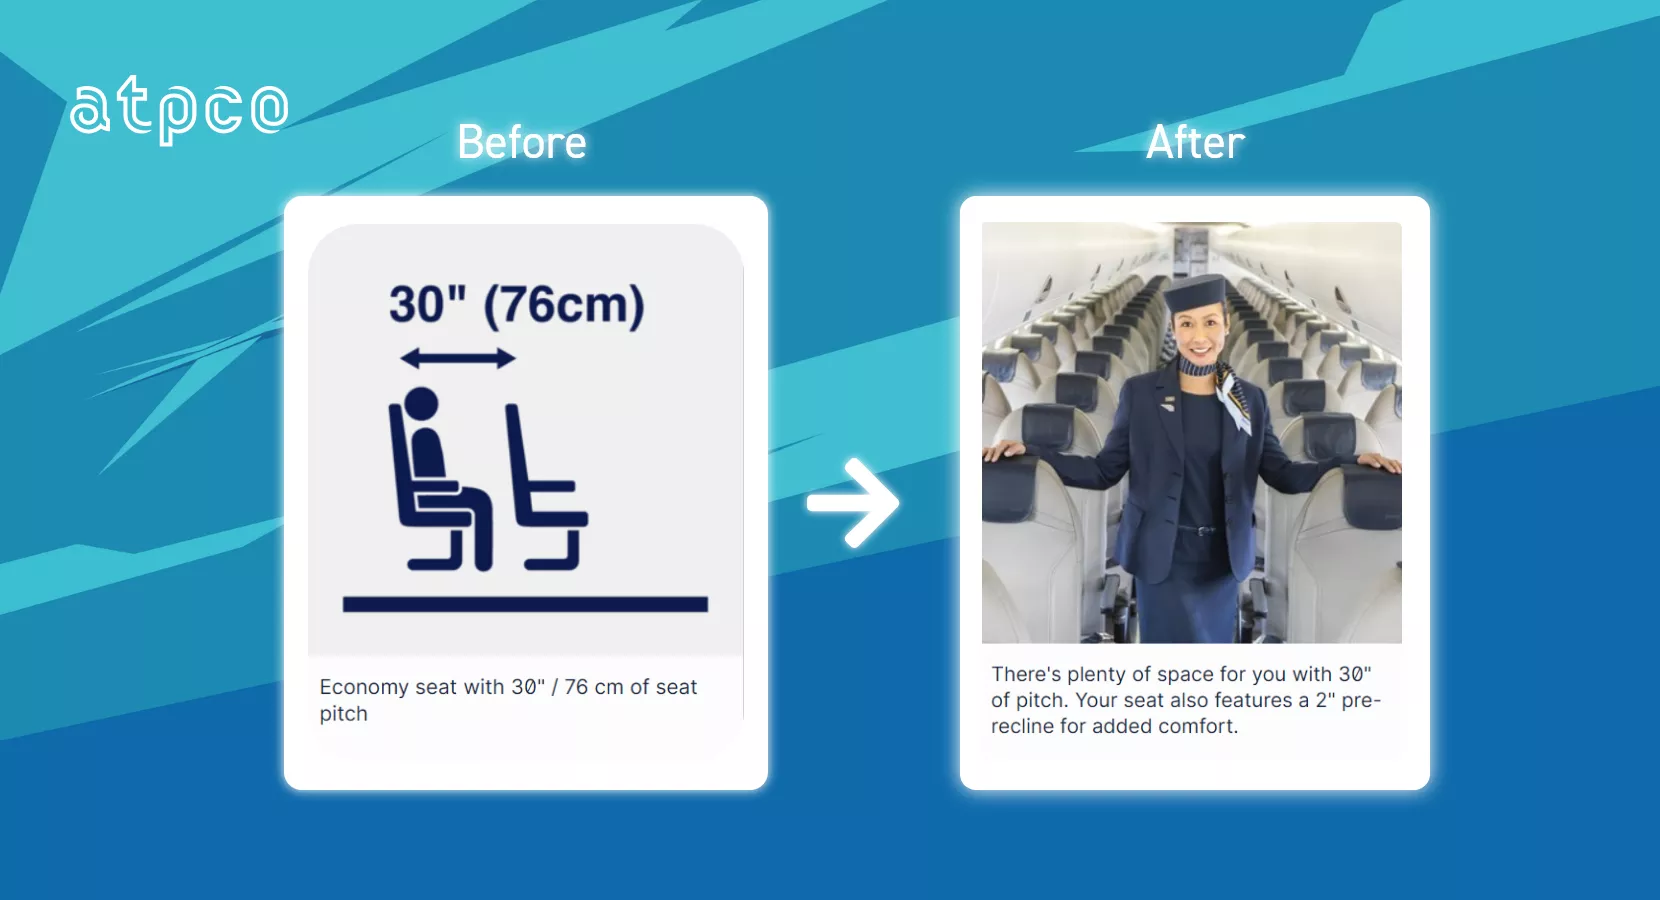 Routehappy and Porter Airlines deliver visually compelling offers for an experience worth craving